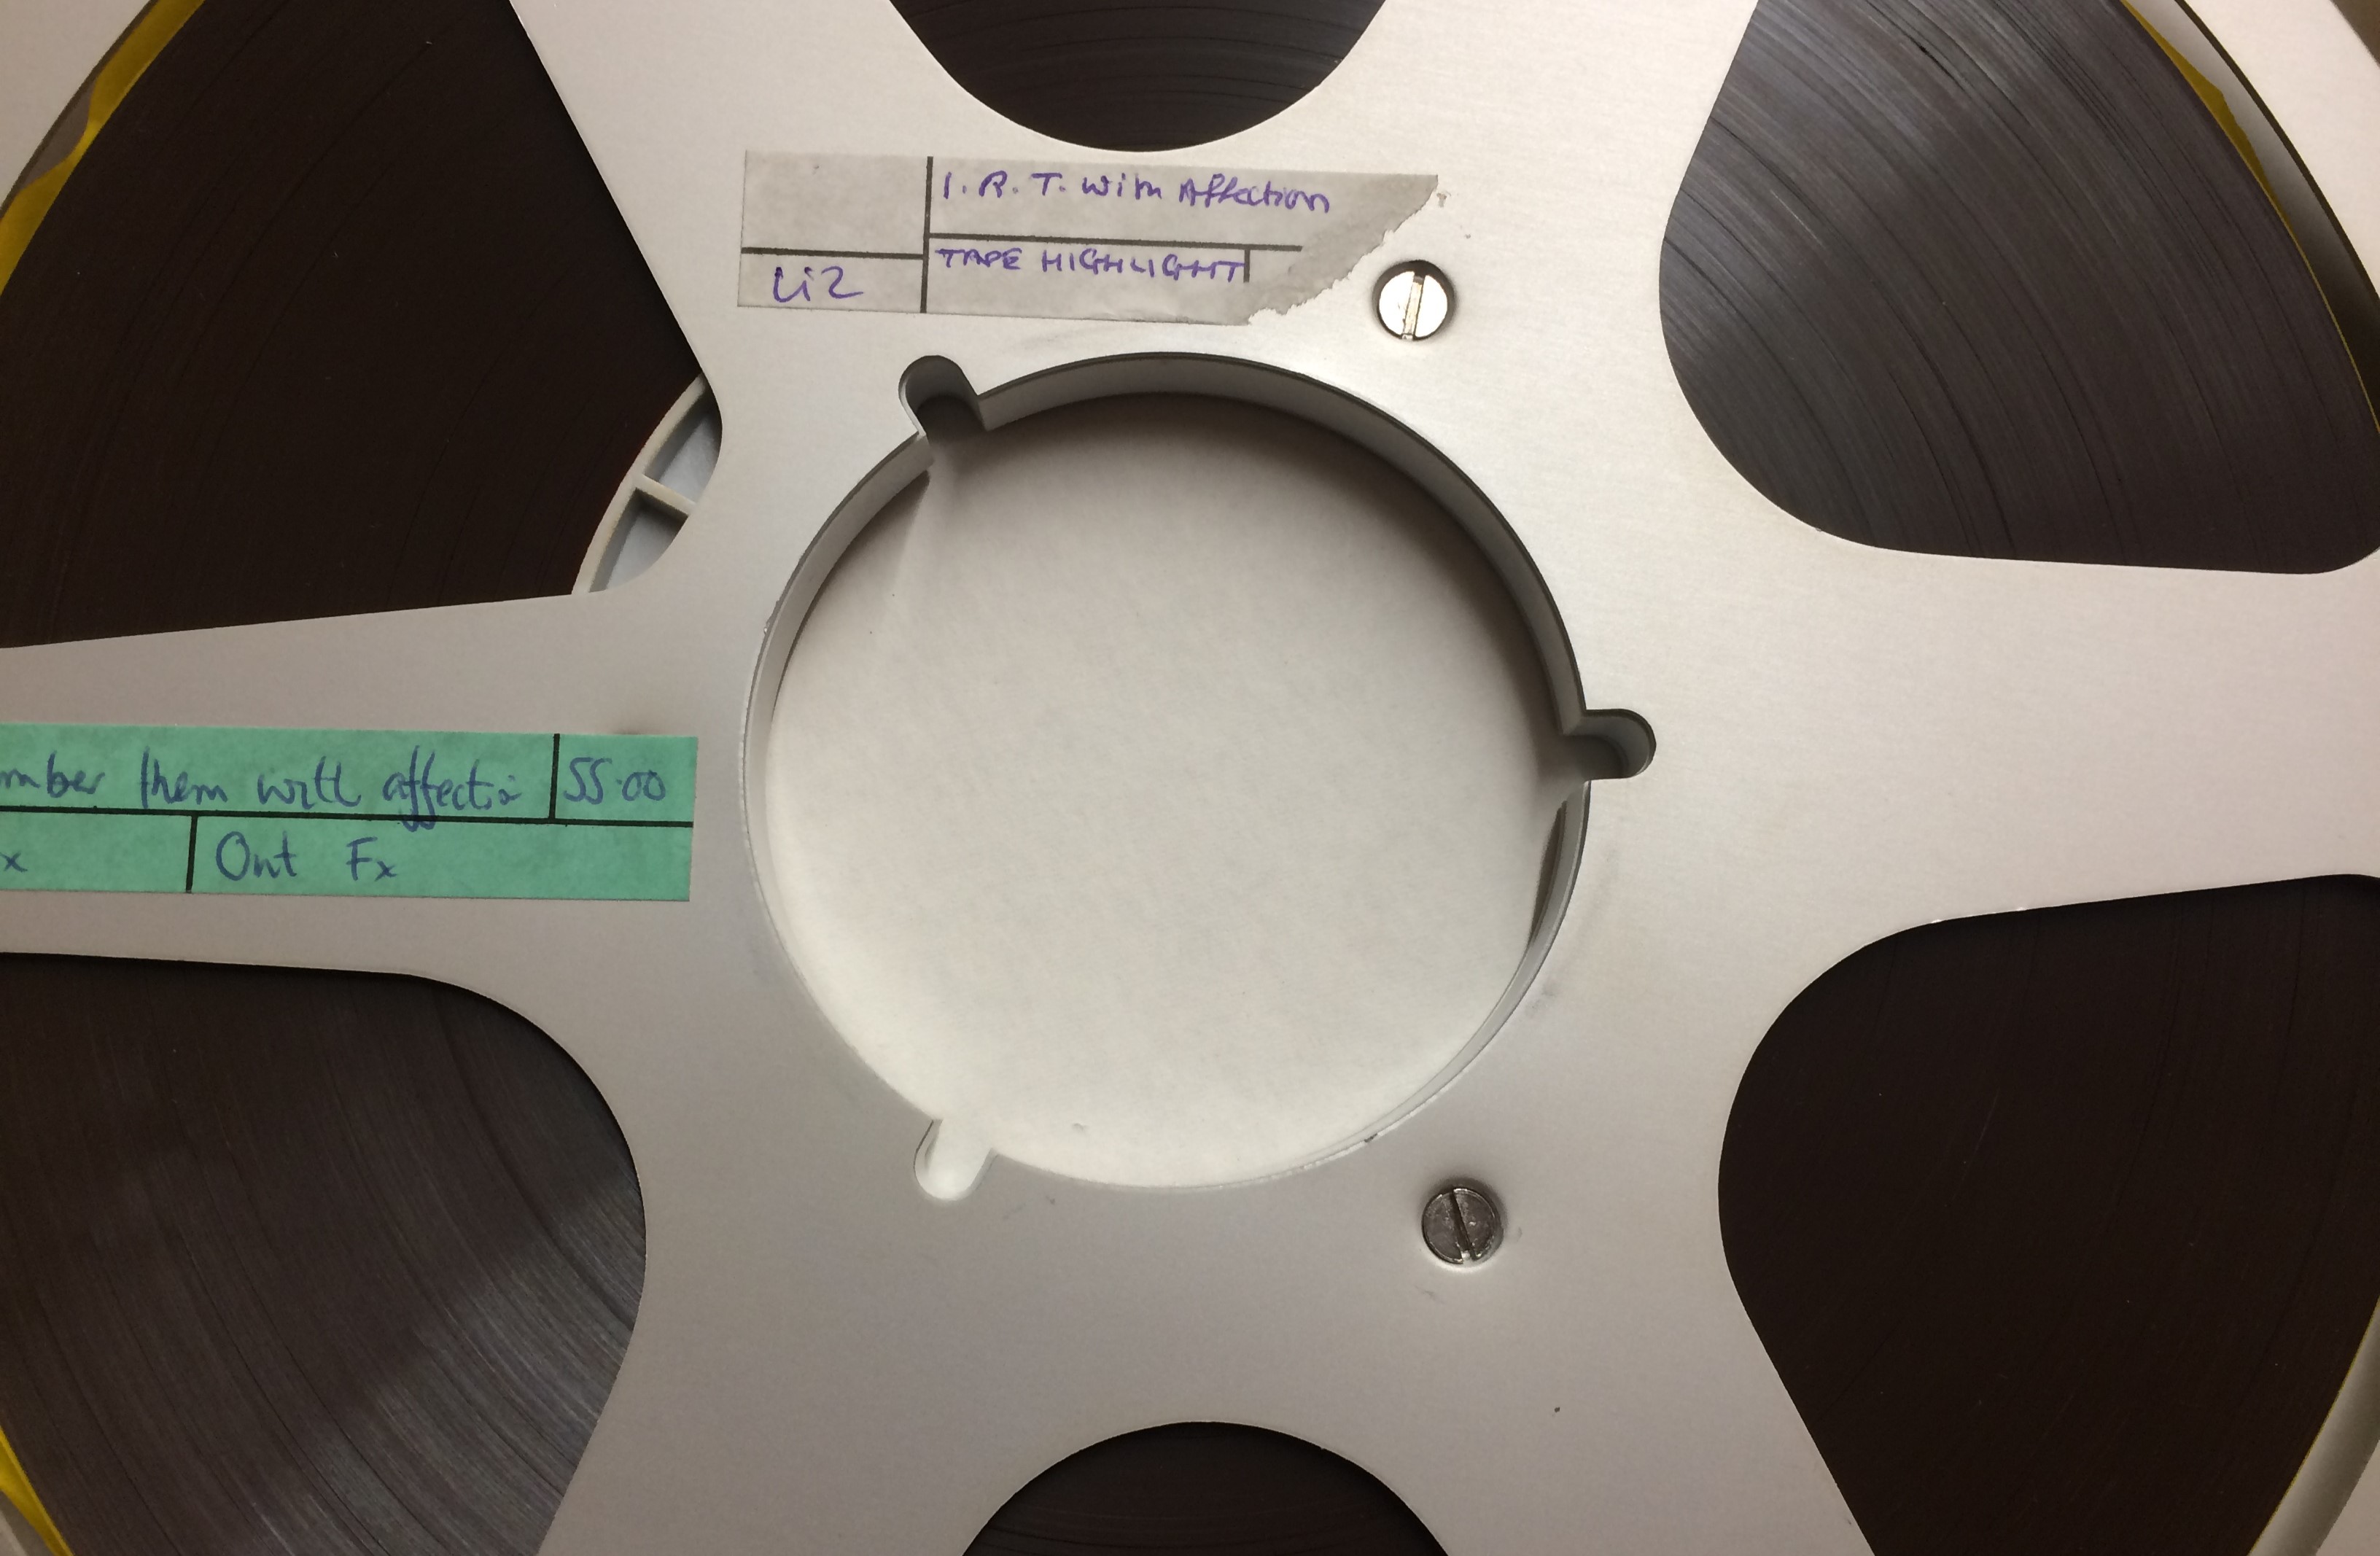 Photograph of silver tape reel with black magnetic audio tape. Two handwritten labels read 'I remember them with affection'.